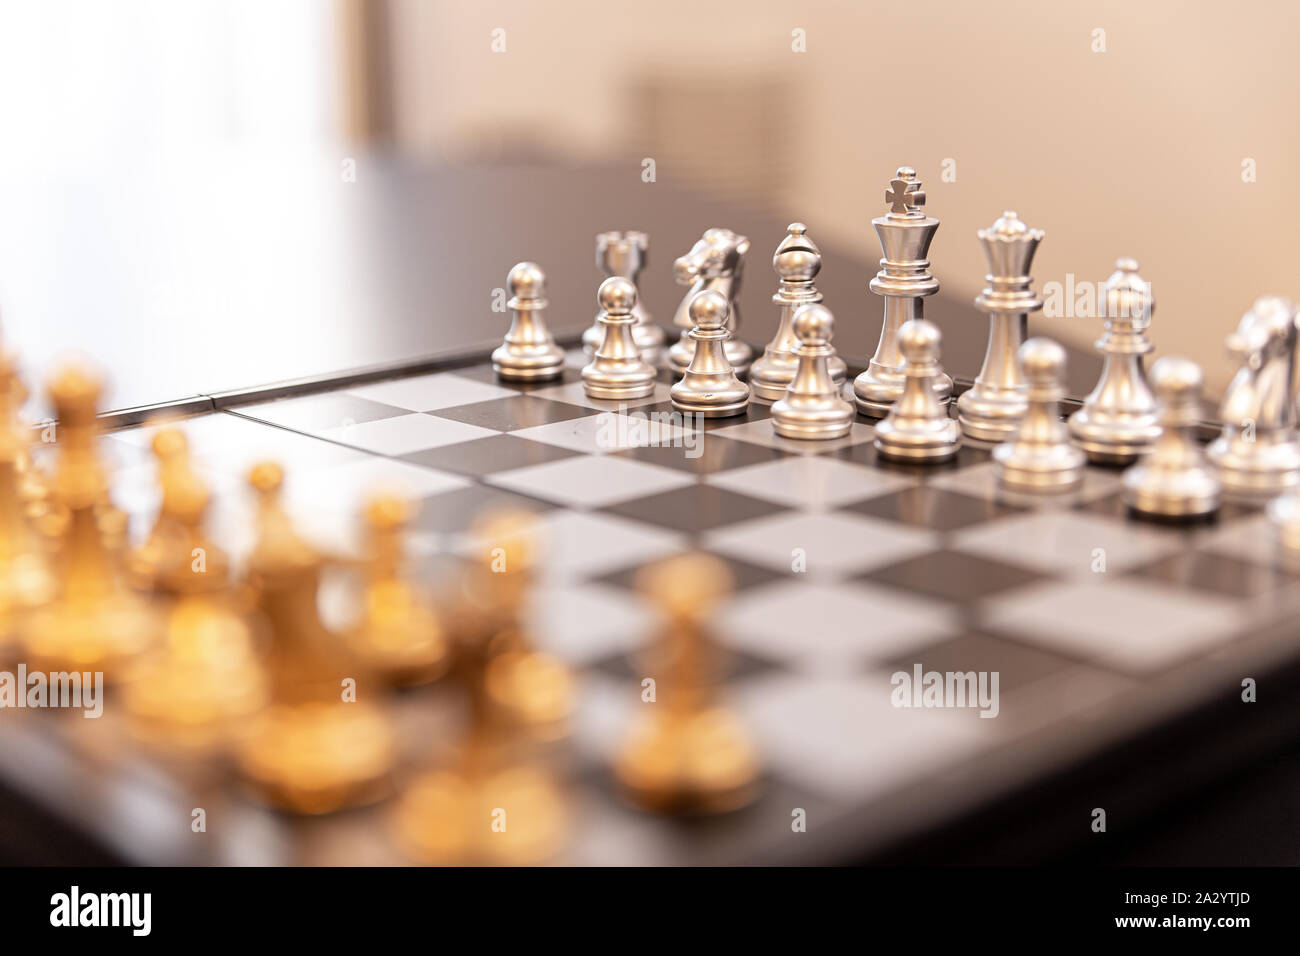 Premium Photo  Wooden chessboard with figures in light and dark brown  tones isolate on a white background